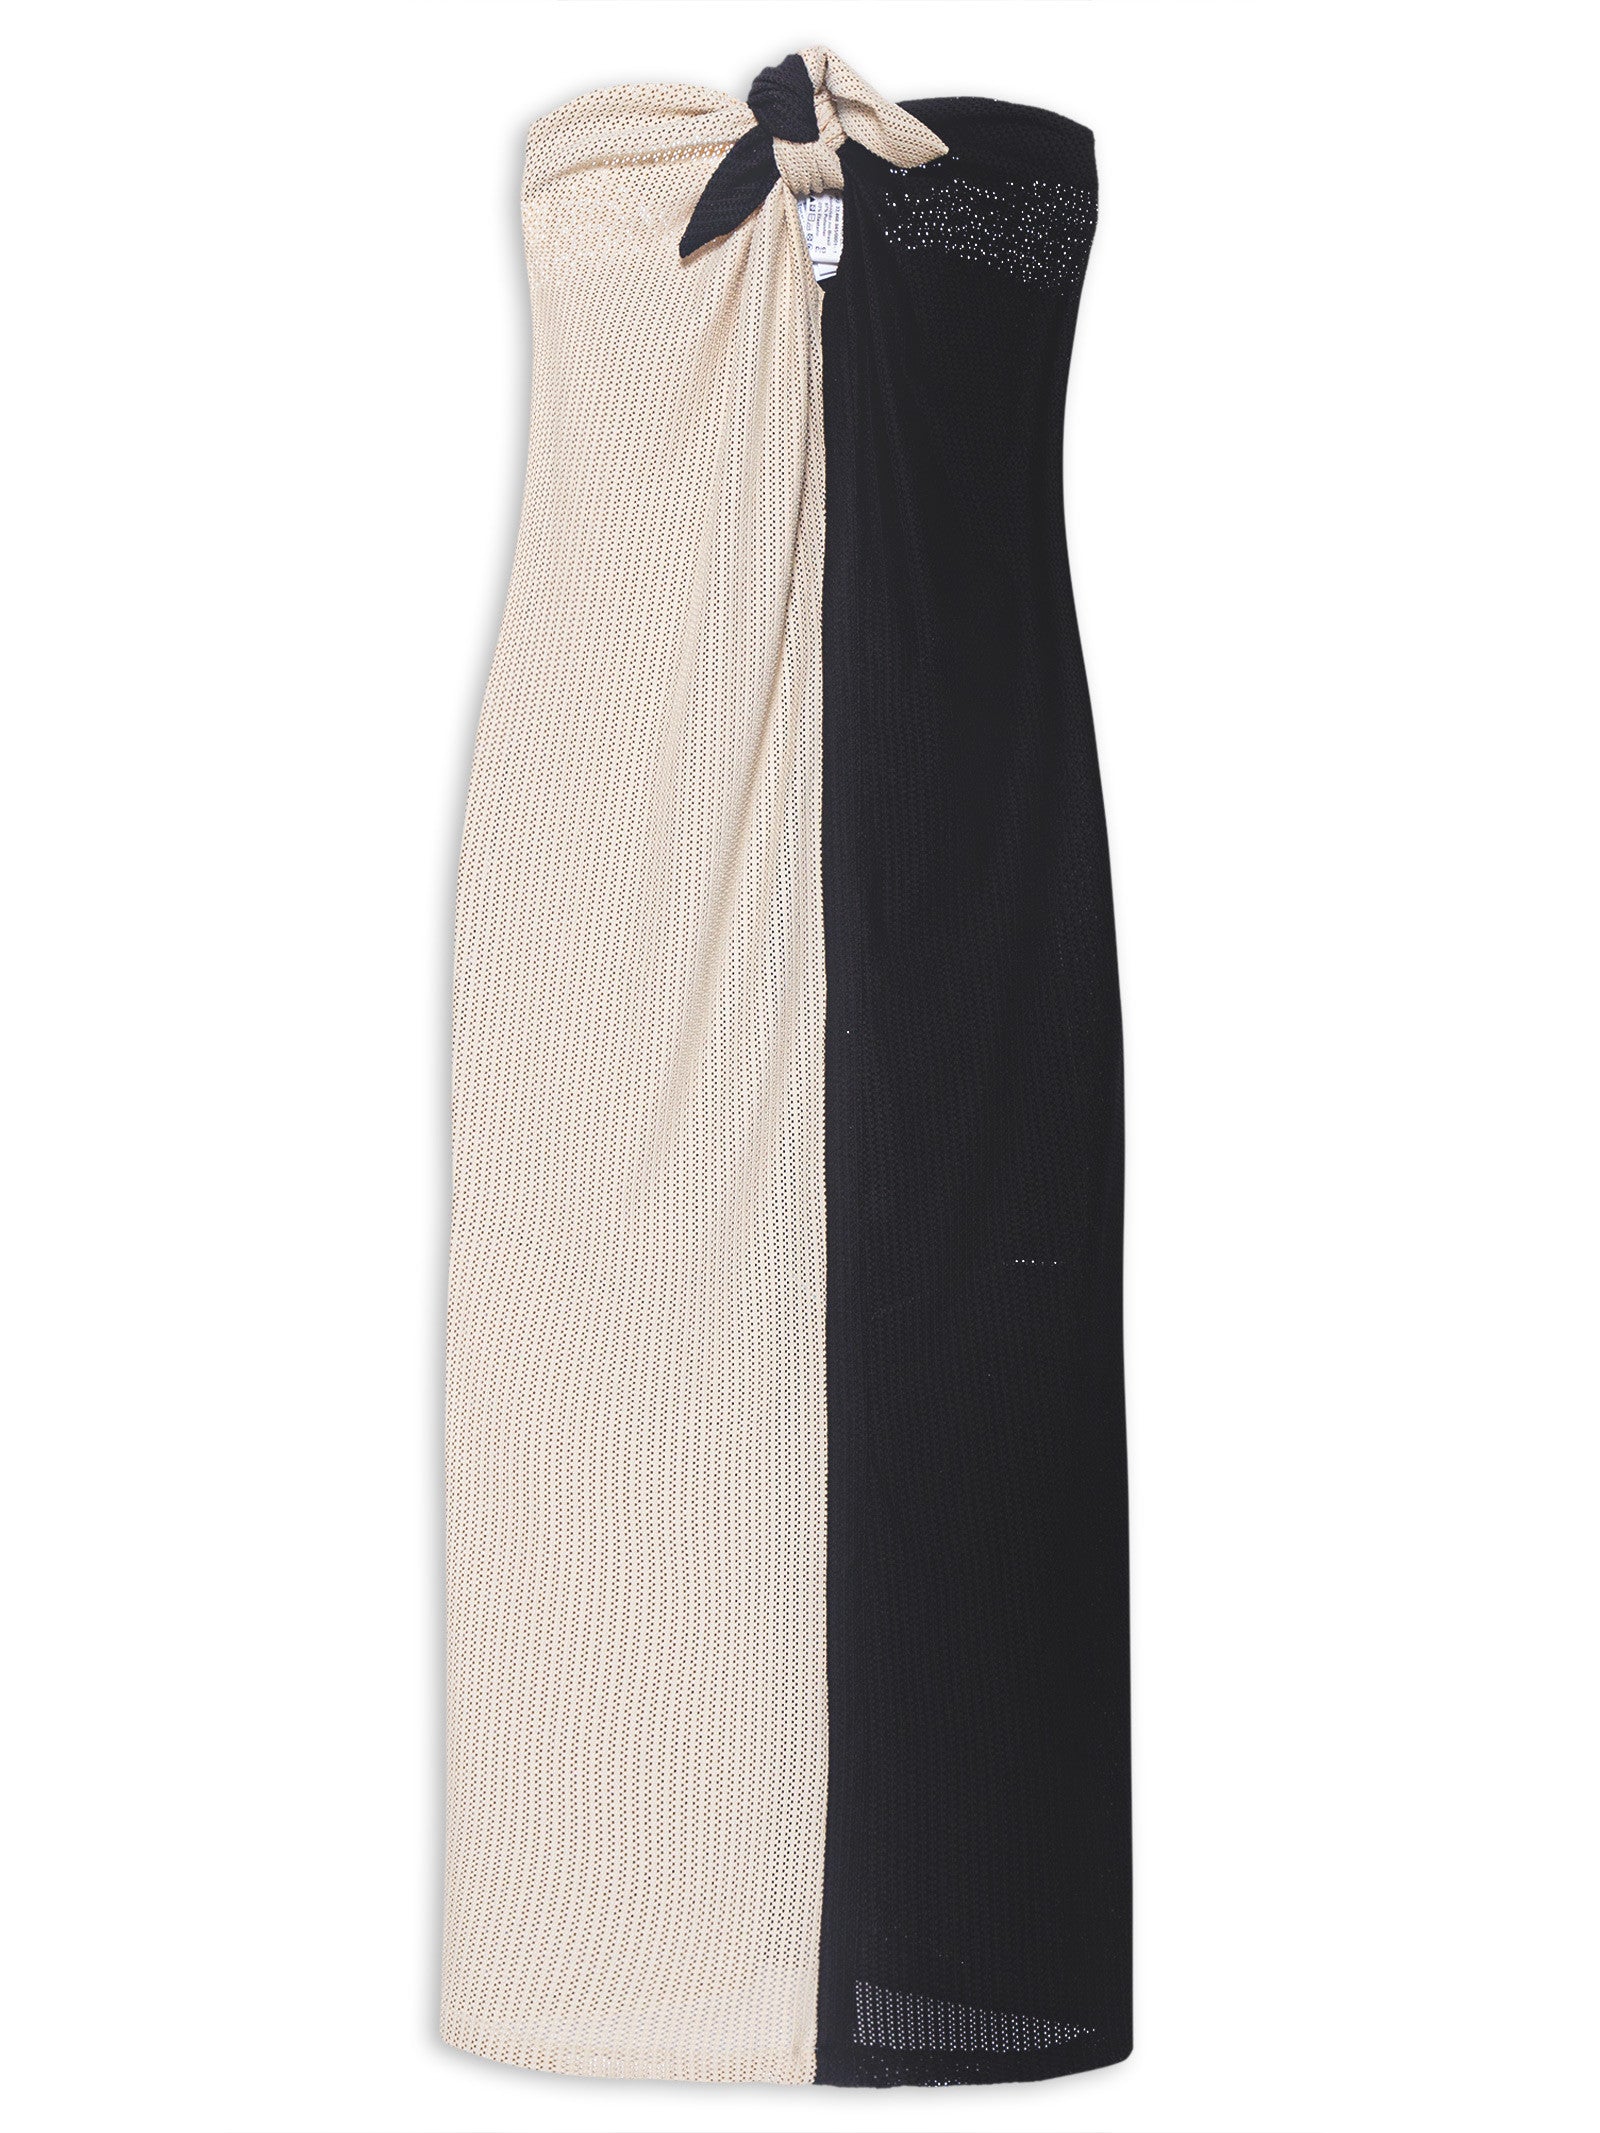 Tricot Black and Beige Knit Dress Product